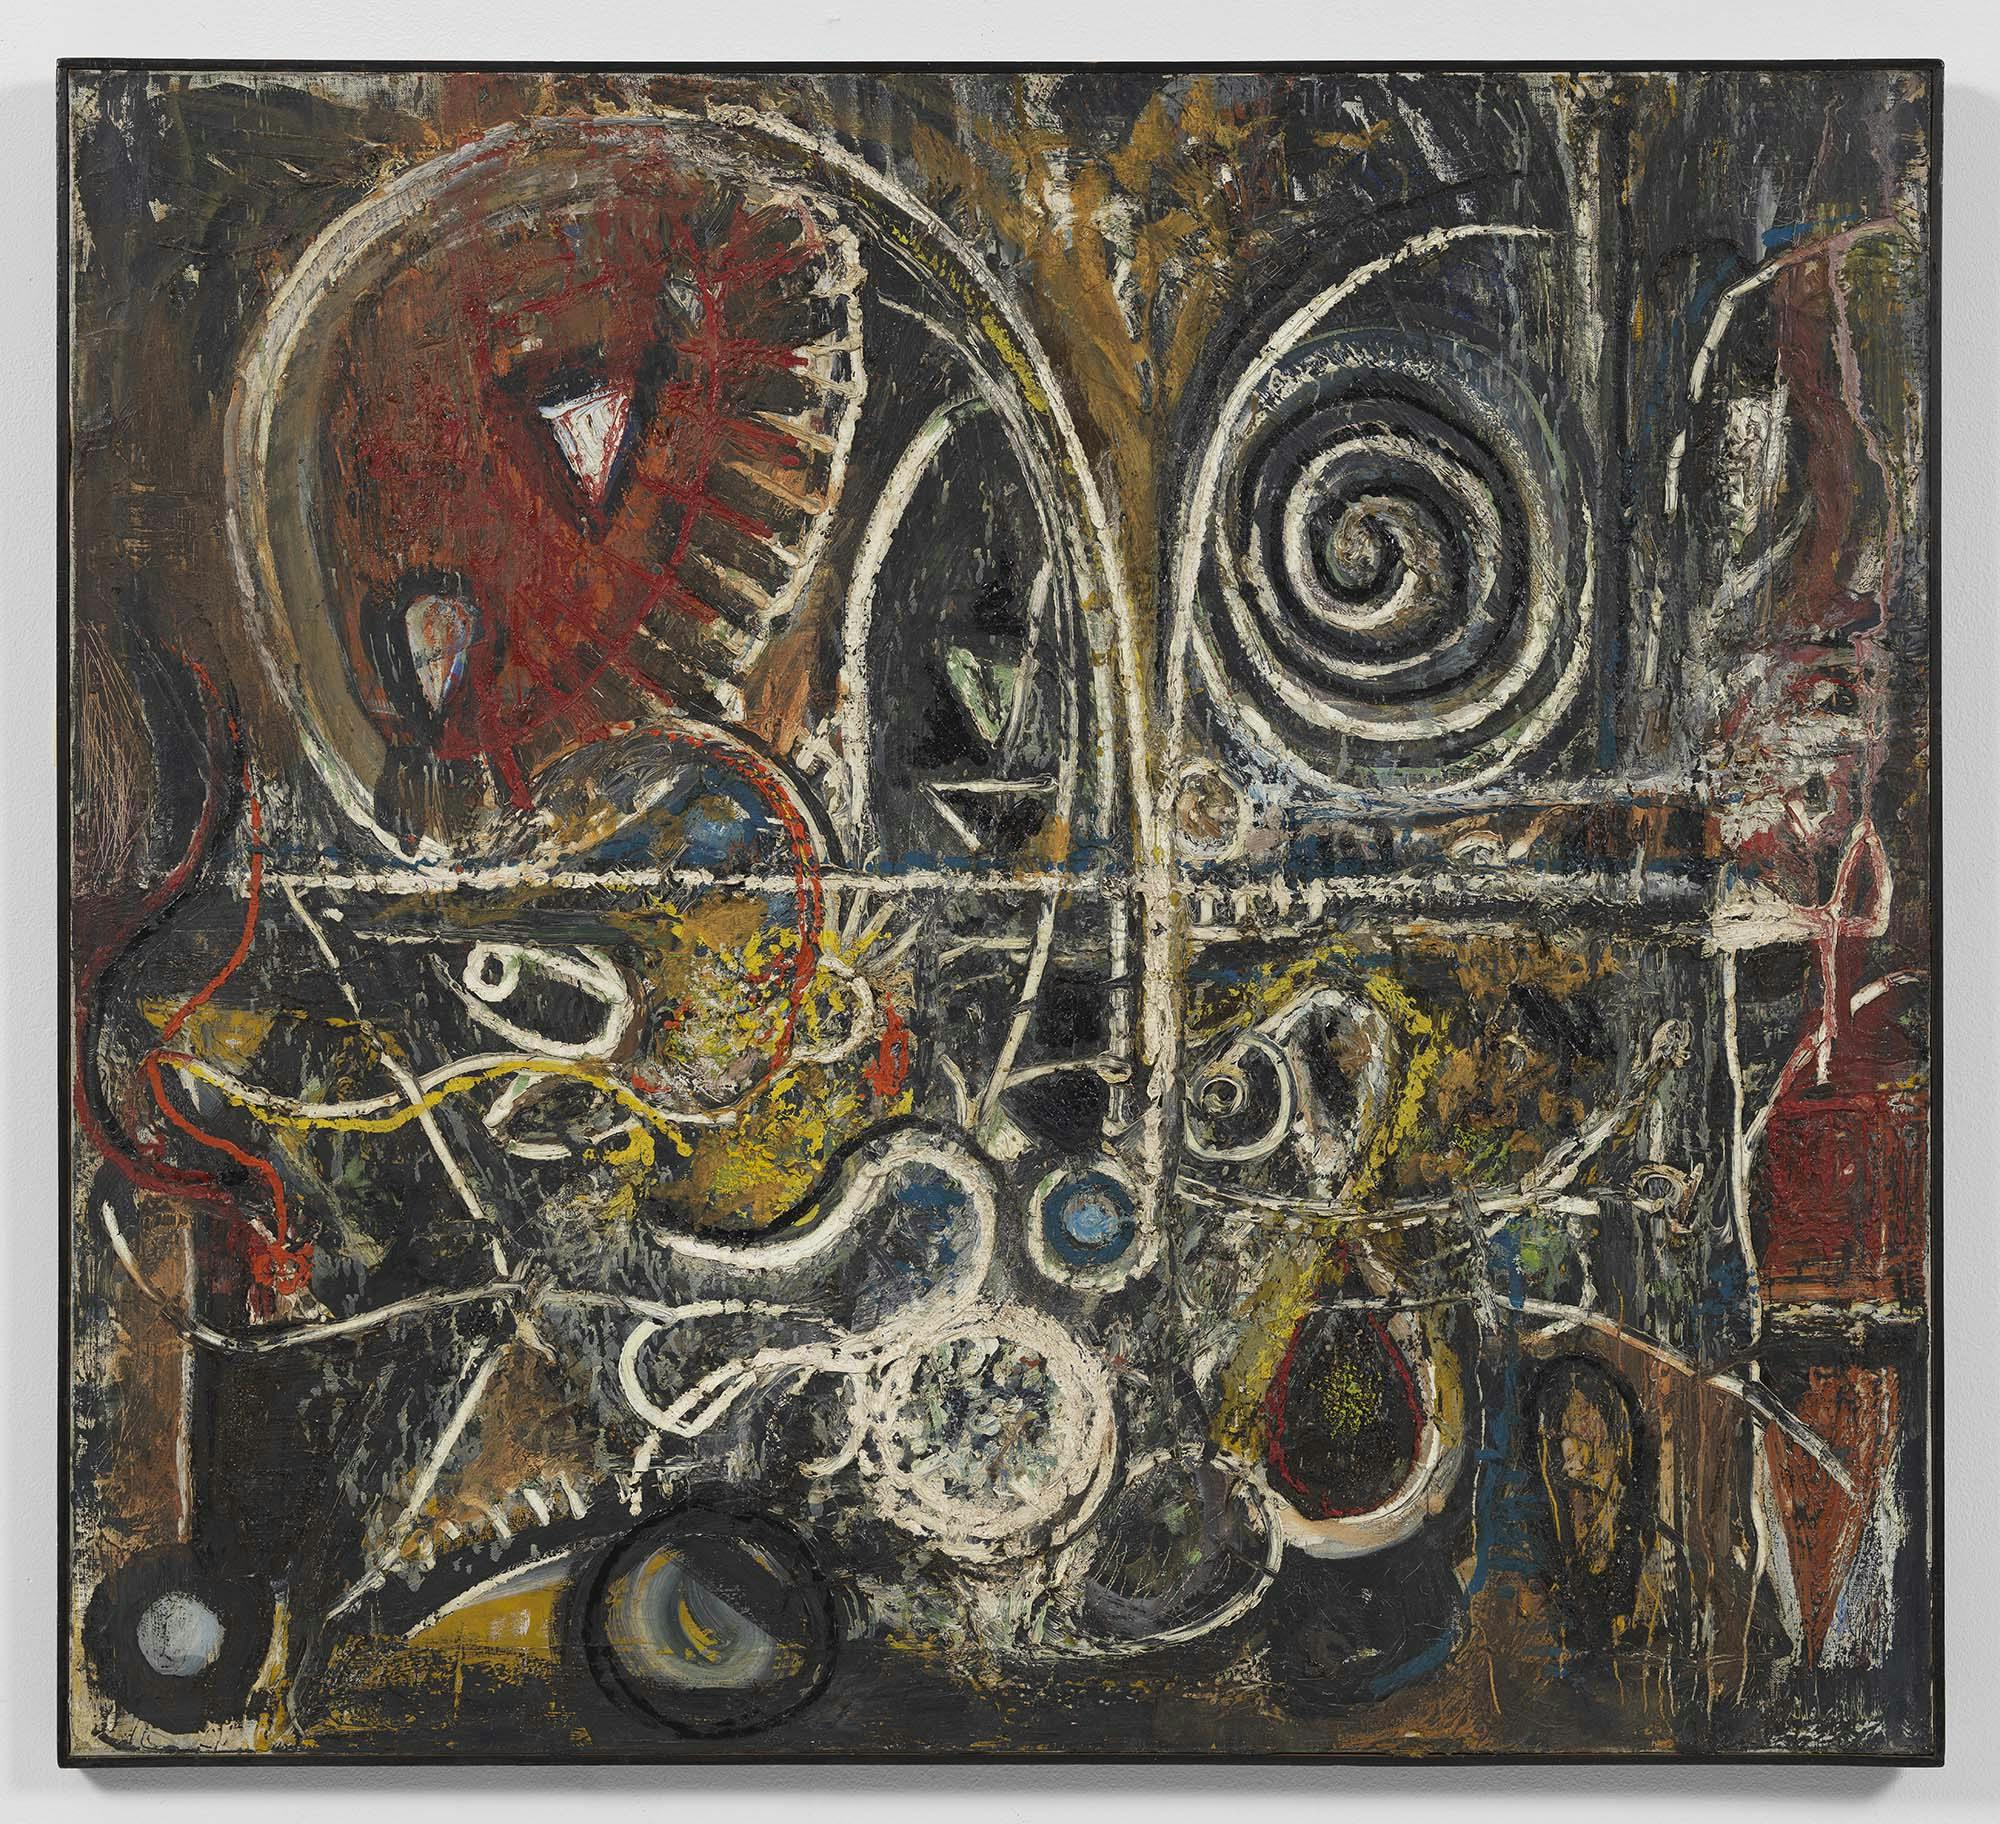 Animal Forms
1939–43
Oil on linen
38 1/2 x 42 in. (97.8 x 106.7 cm)
 – The Richard Pousette-Dart Foundation